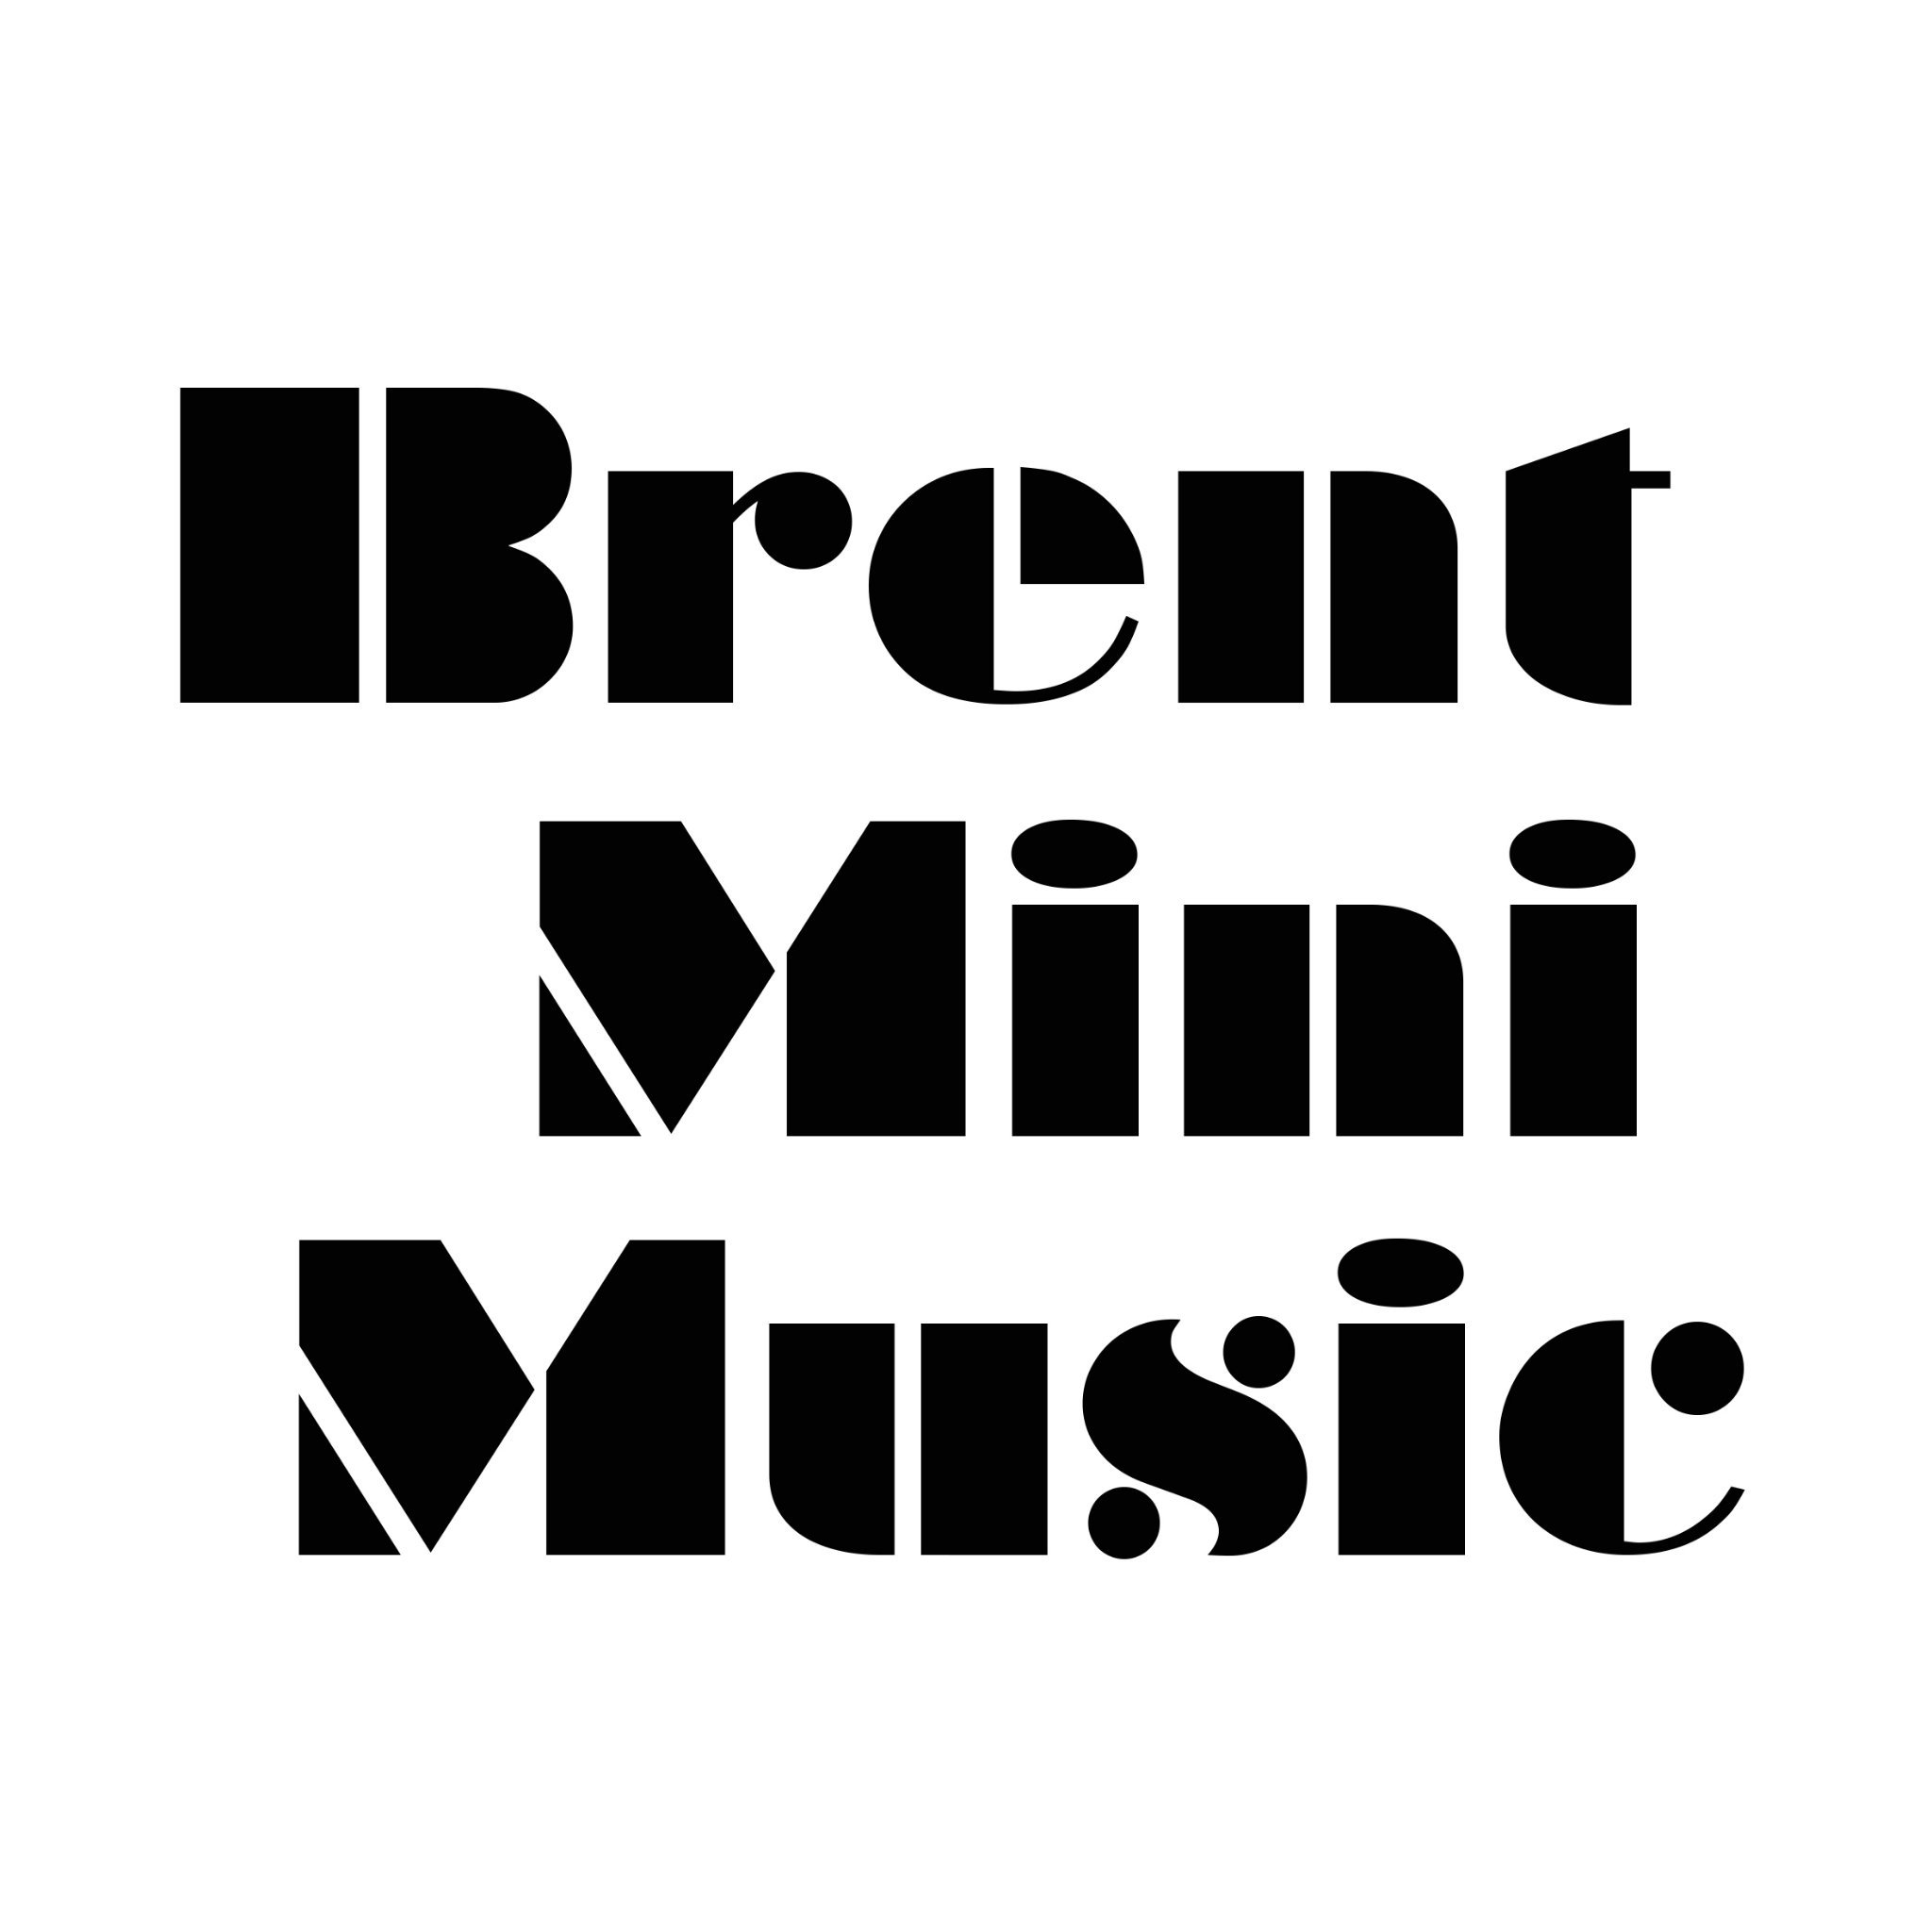 I'm a long careered professional composer. Brent Mini Music provides versatile, high quality music for media through royalty free music services.